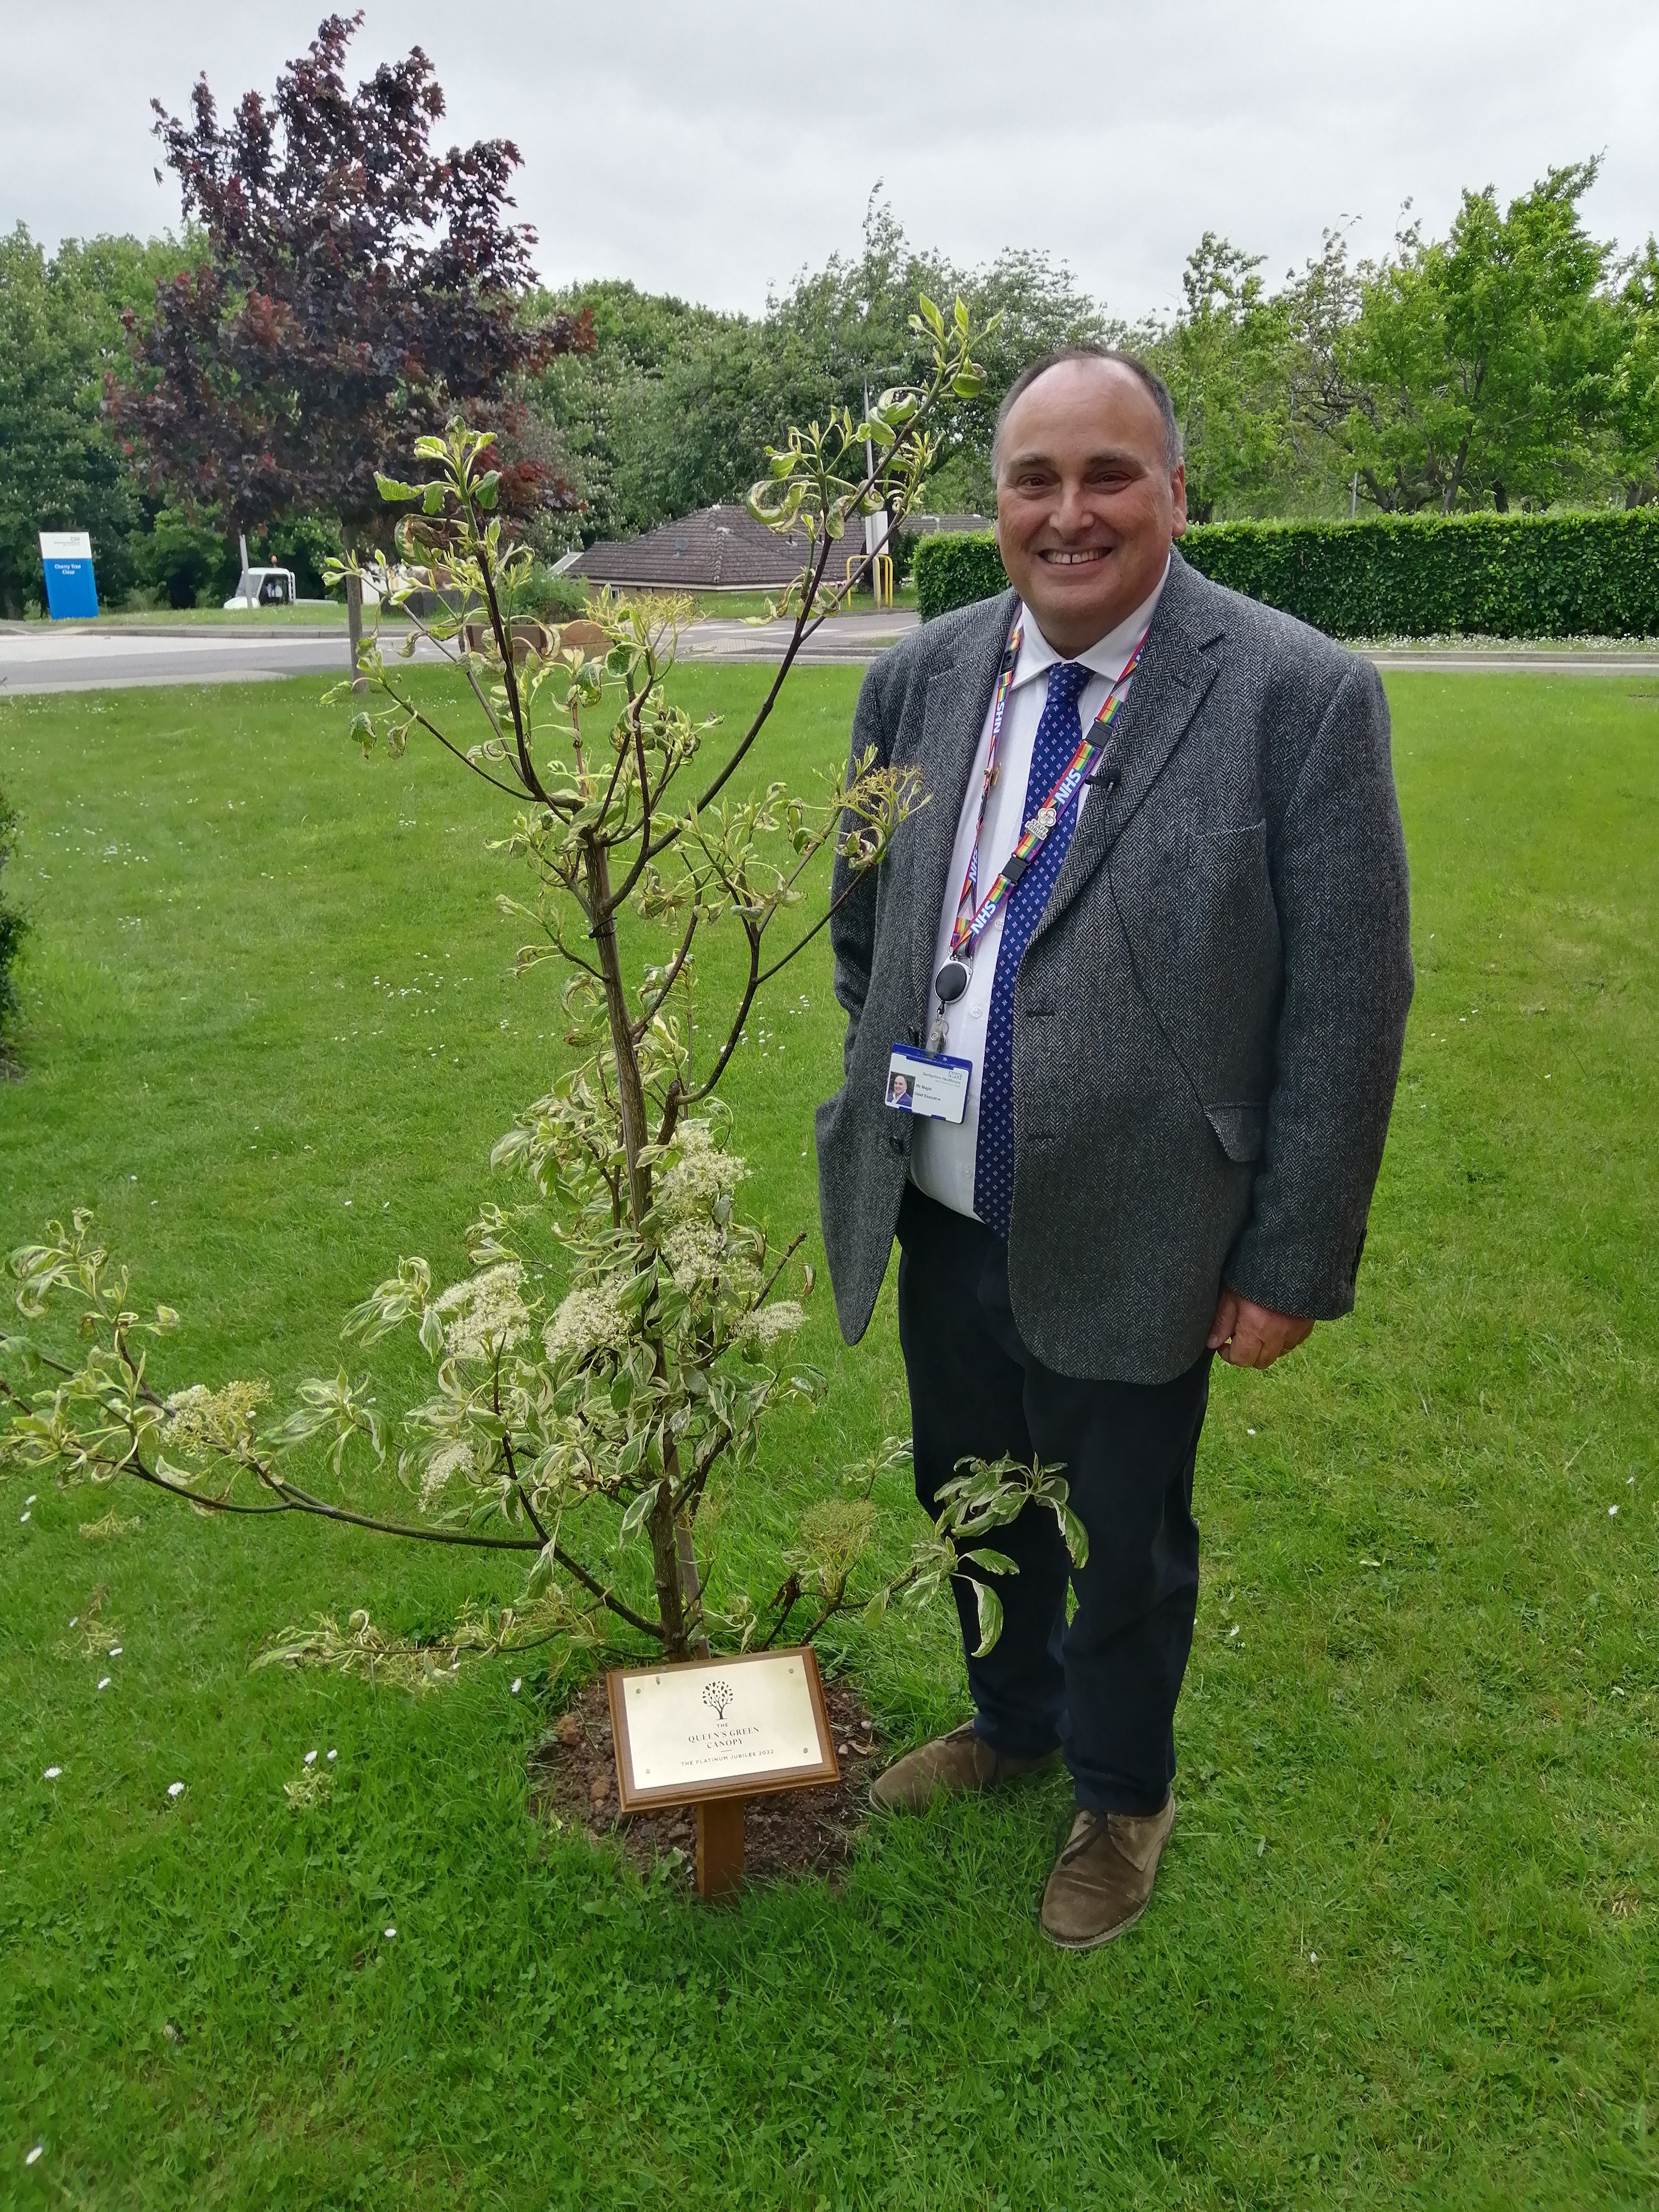 Derbyshire Healthcare ‘plants a tree for the Jubilee’ in honour of the Queen’s 70 years of service